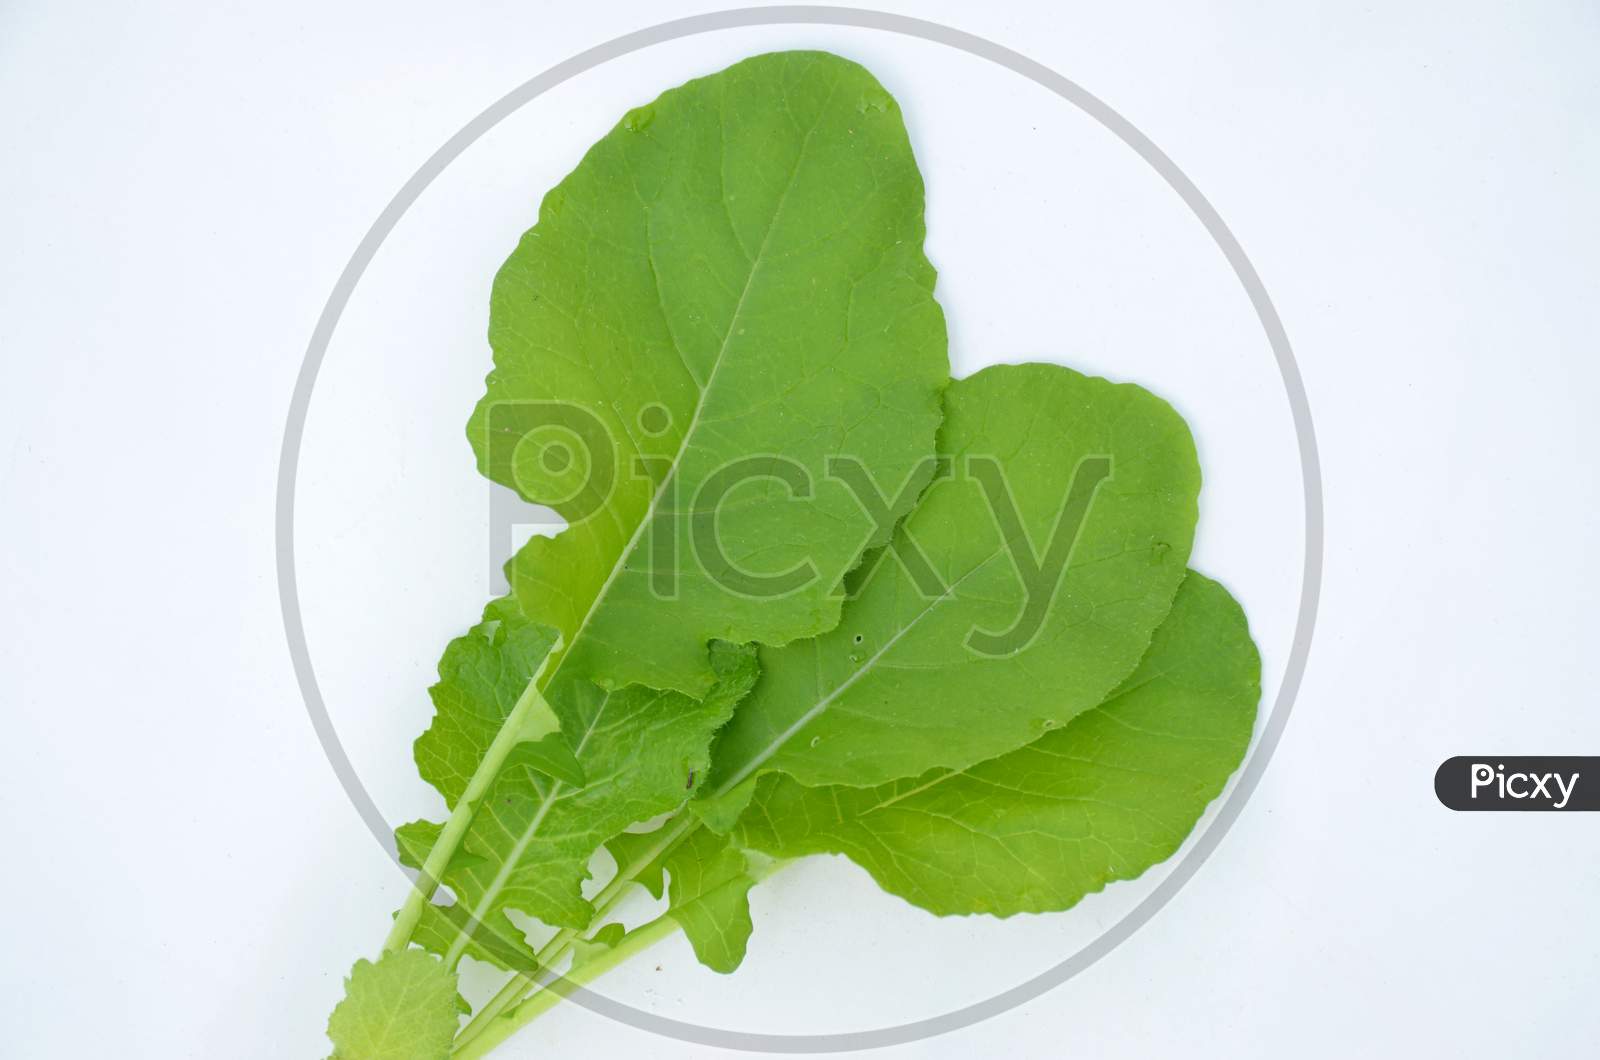 The Green Ripe Spinach Leaves Isolated On White Background.